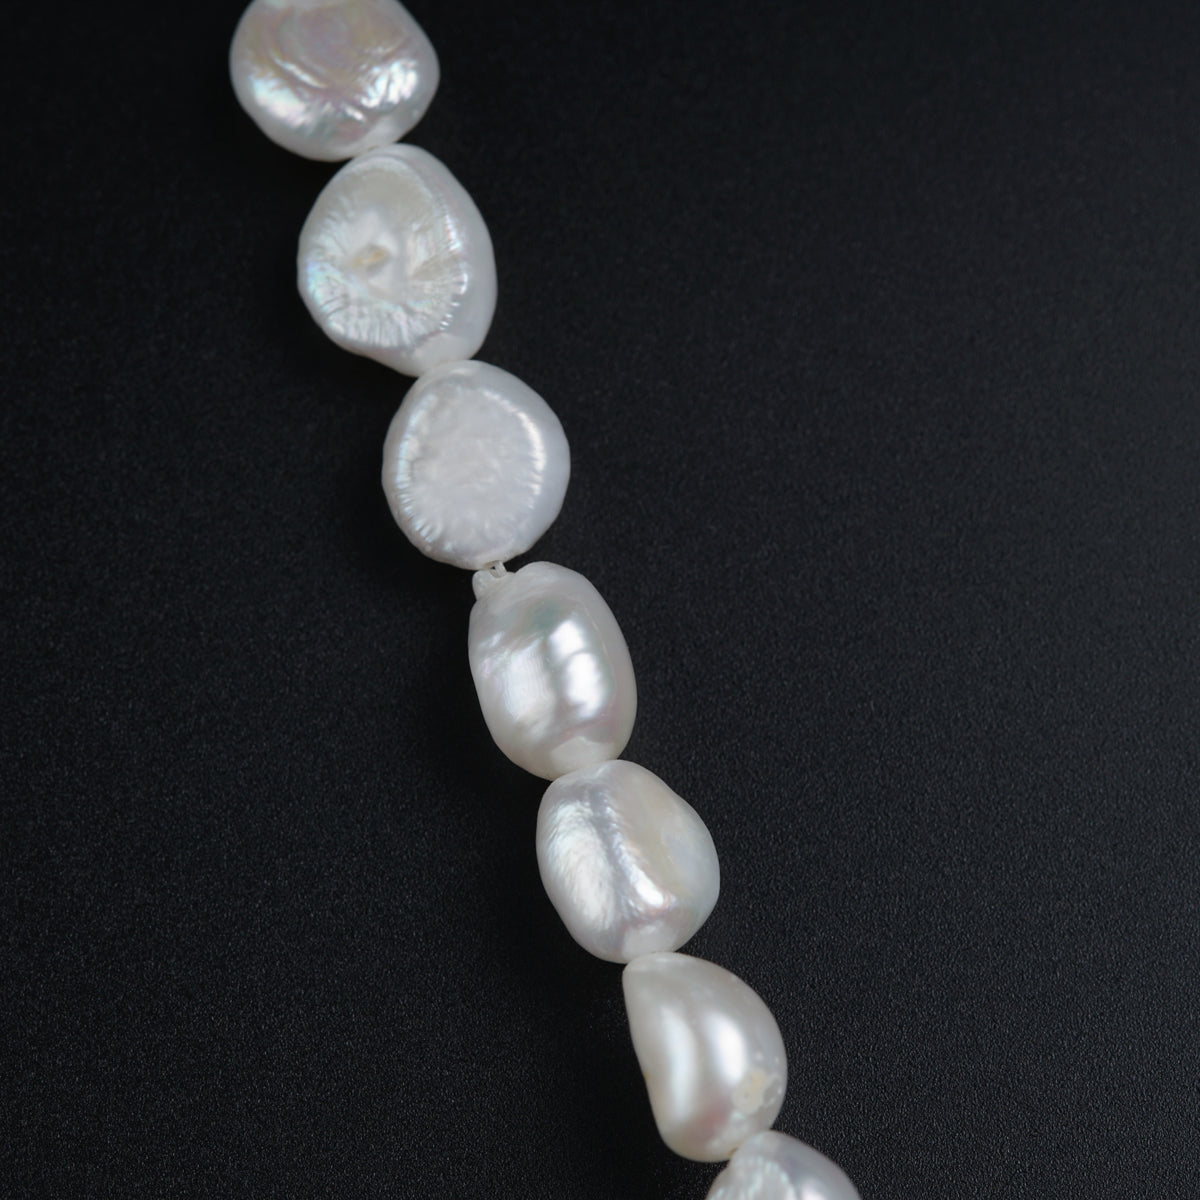 a long strand of white pearls on a black surface